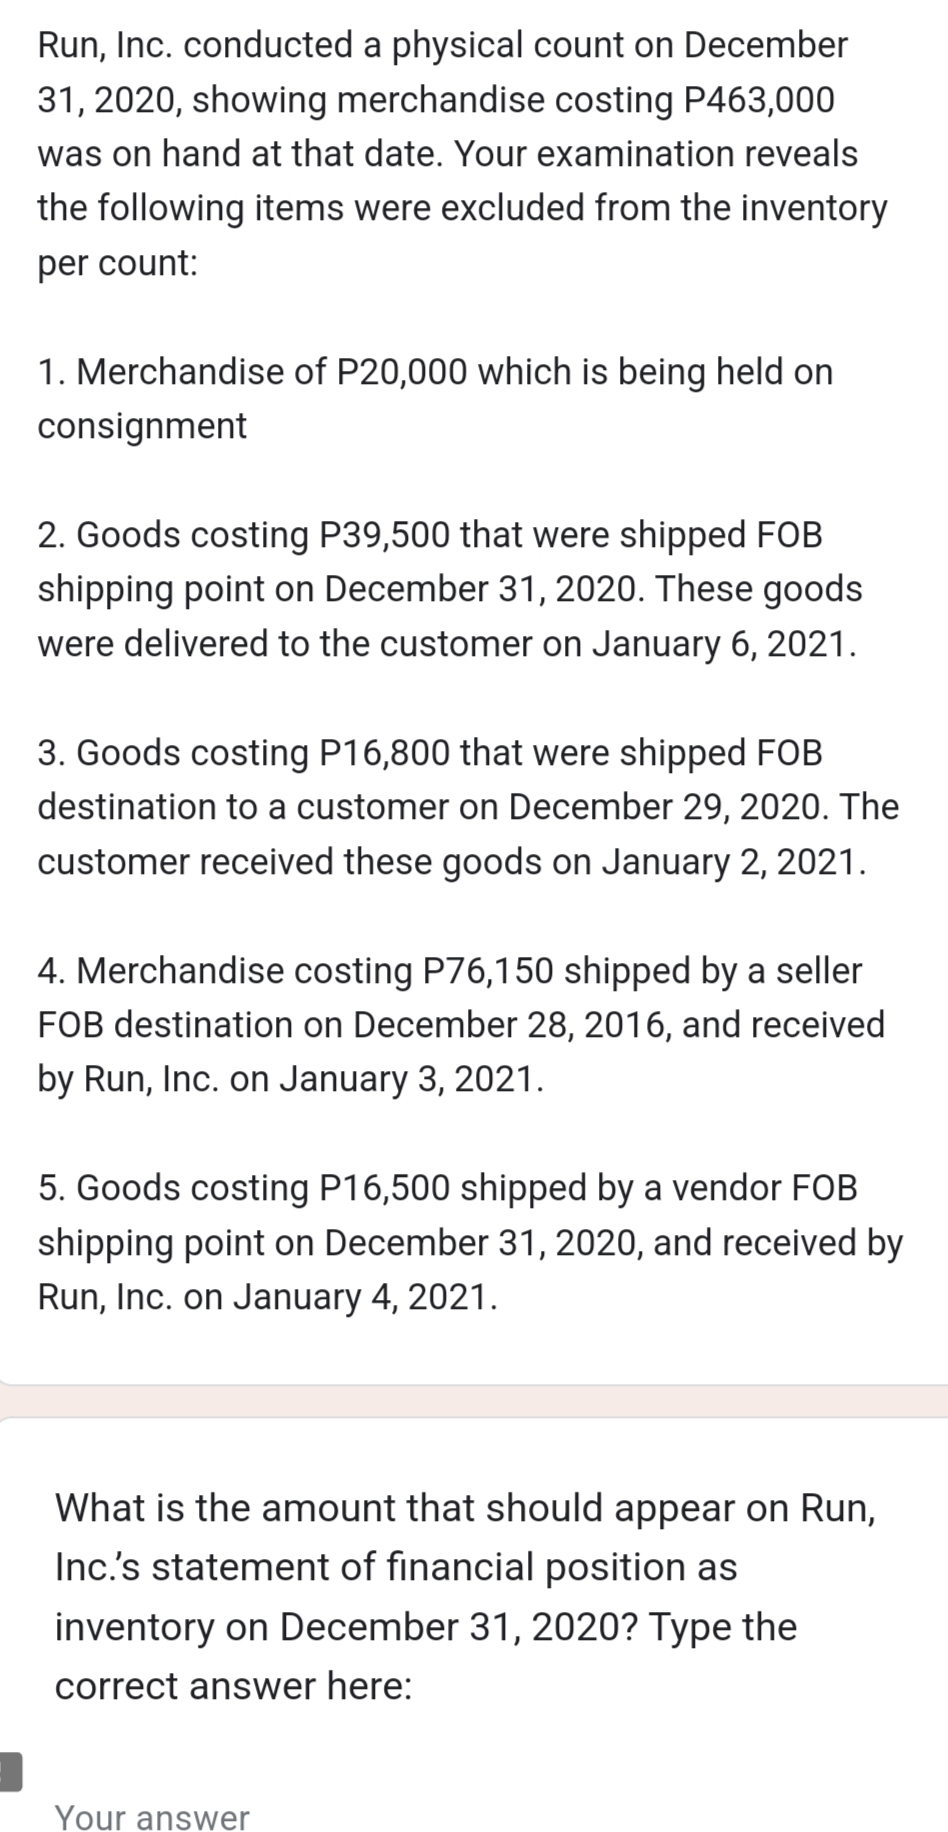 Run, Inc. conducted a physical count on December
31, 2020, showing merchandise costing P463,000
was on hand at that date. Your examination reveals
the following items were excluded from the inventory
per count:
1. Merchandise of P20,000 which is being held on
consignment
2. Goods costing P39,500 that were shipped FOB
shipping point on December 31, 2020. These goods
were delivered to the customer on January 6, 2021.
3. Goods costing P16,800 that were shipped FOB
destination to a customer on December 29, 2020. The
customer received these goods on January 2, 2021.
4. Merchandise costing P76,150 shipped by a seller
FOB destination on December 28, 2016, and received
by Run, Inc. on January 3, 2021.
5. Goods costing P16,500 shipped by a vendor FOB
shipping point on December 31, 2020, and received by
Run, Inc. on January 4, 2021.
What is the amount that should appear on Run,
Inc.'s statement of financial position as
inventory on December 31, 2020? Type the
correct answer here:
Your answer